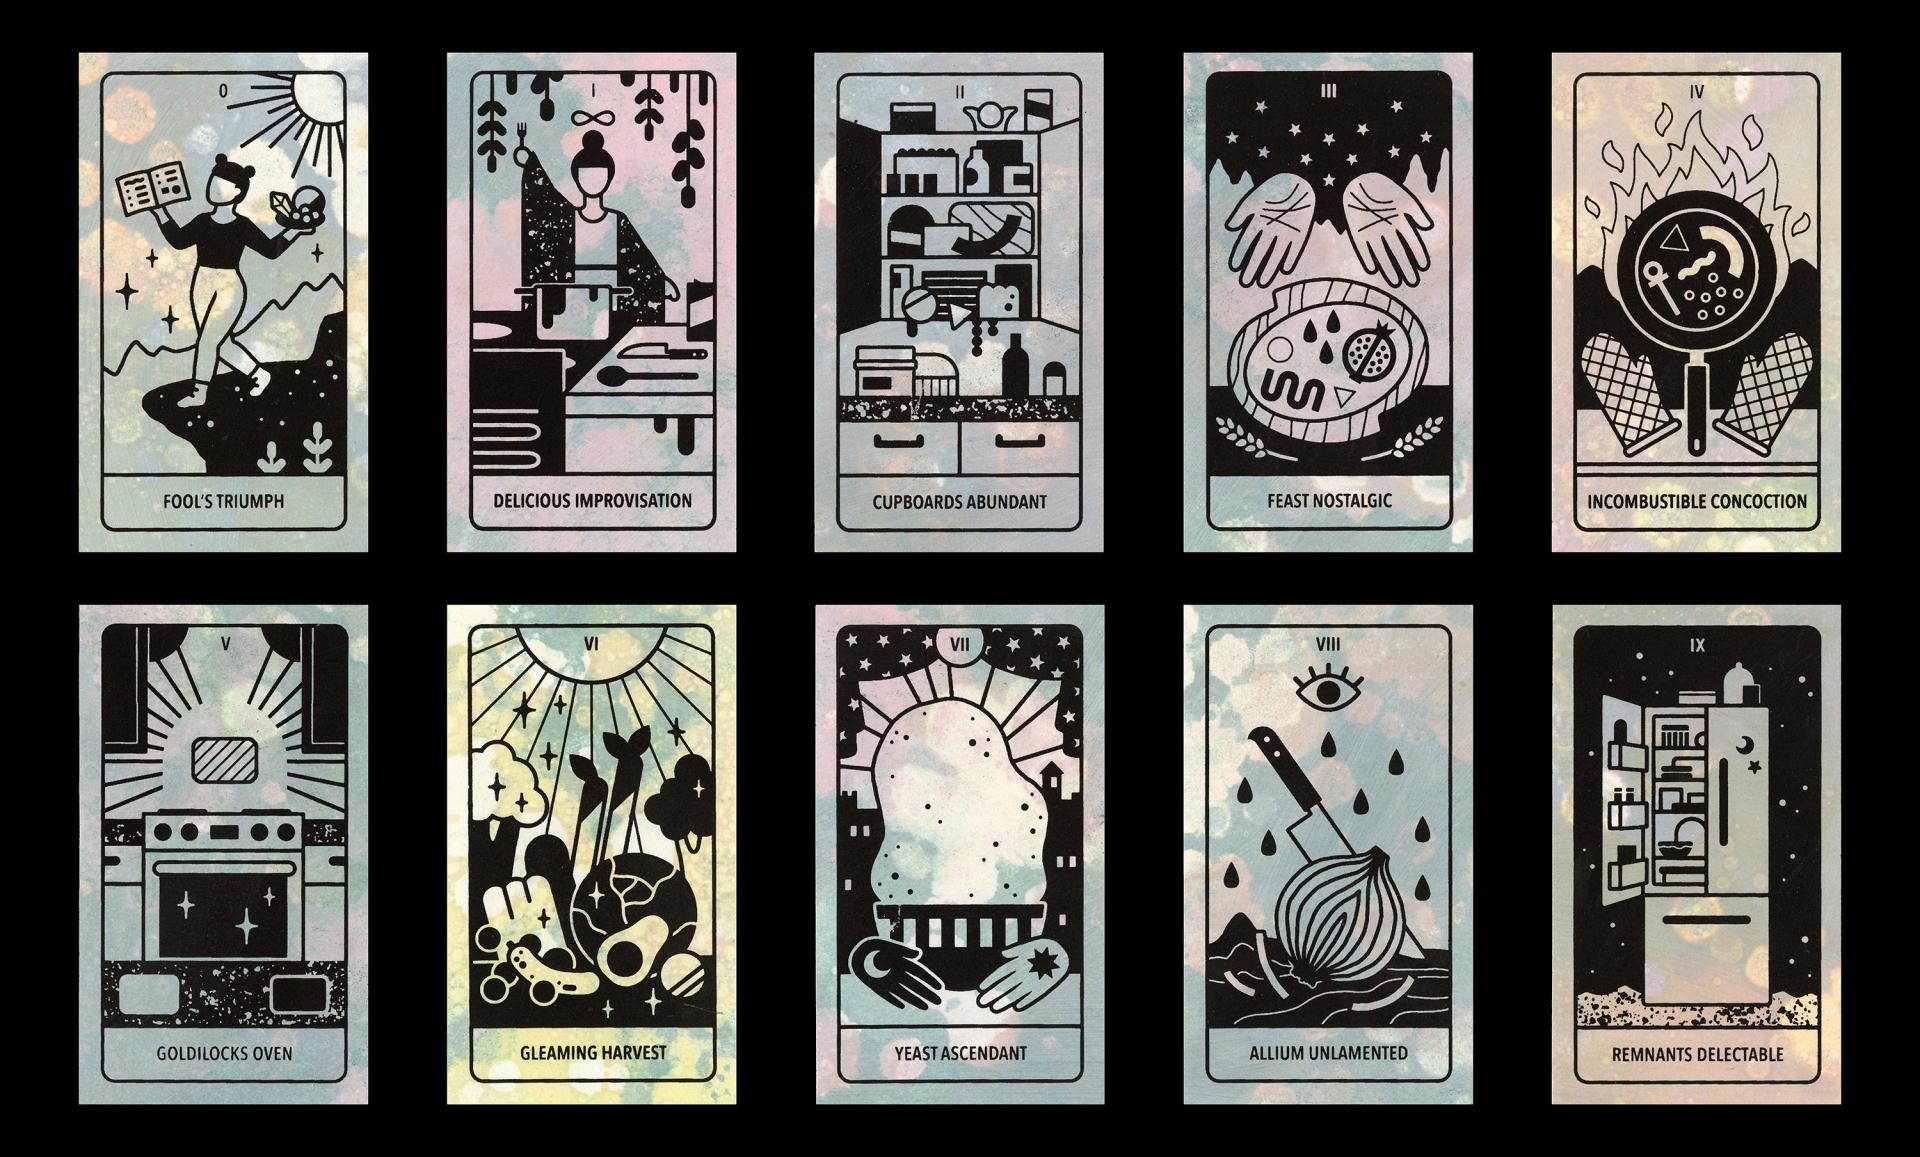 Designs for a deck of cards used to bring you good luck in the kitchen. Keep the talisman of your choice on the fridge to aid in your cooking.